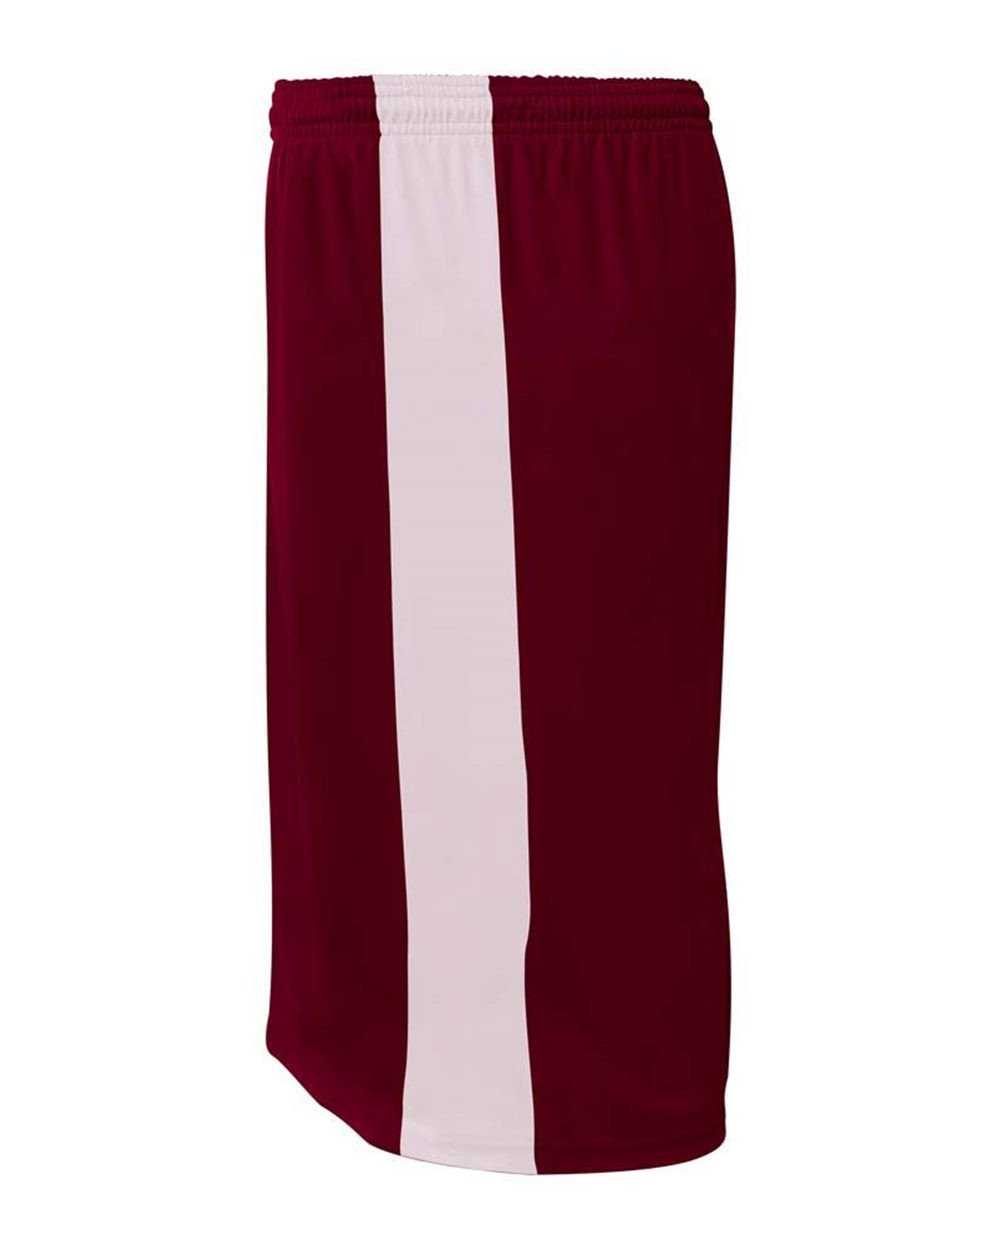 A4 NB5284 Youth Reversible Moisture Management 8" Short - Maroon White - HIT a Double